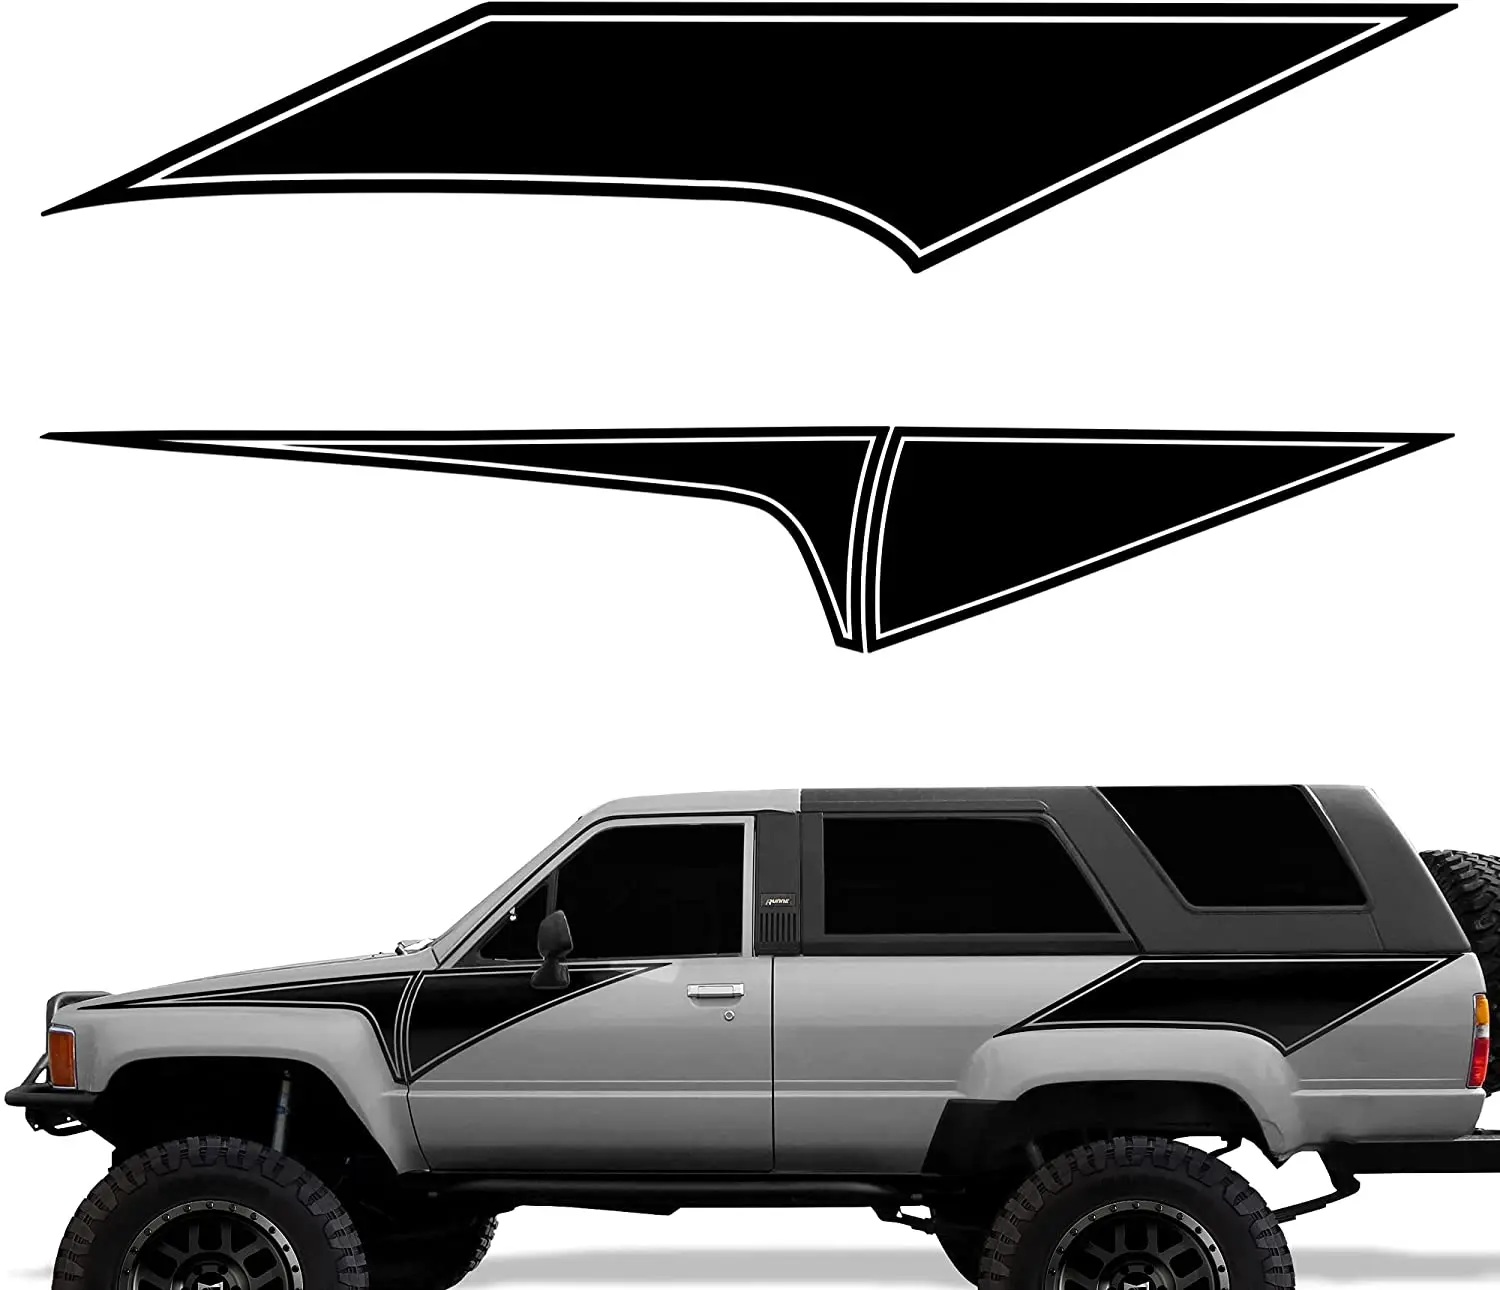 

Factory Crafts Pin Stripes Side Graphics Kit 3M Vinyl Decal Wrap Compatible with Toyota 4Runner 1987-1988 - Matte Black